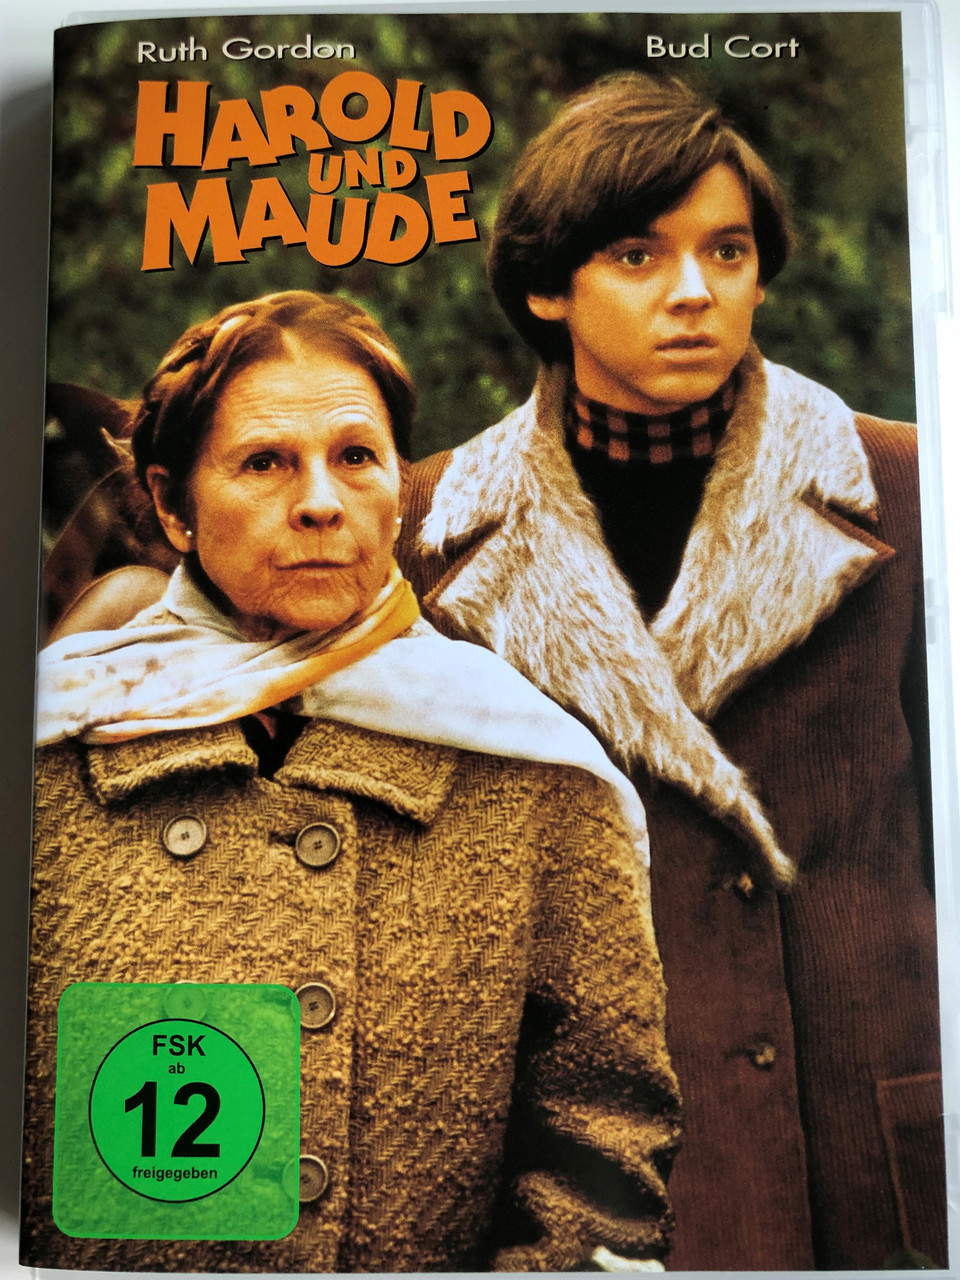 Harold And Maude Dvd 1971 Harold Und Maude Directed By Hal Ashby Starring Ruth Gordon Bud 